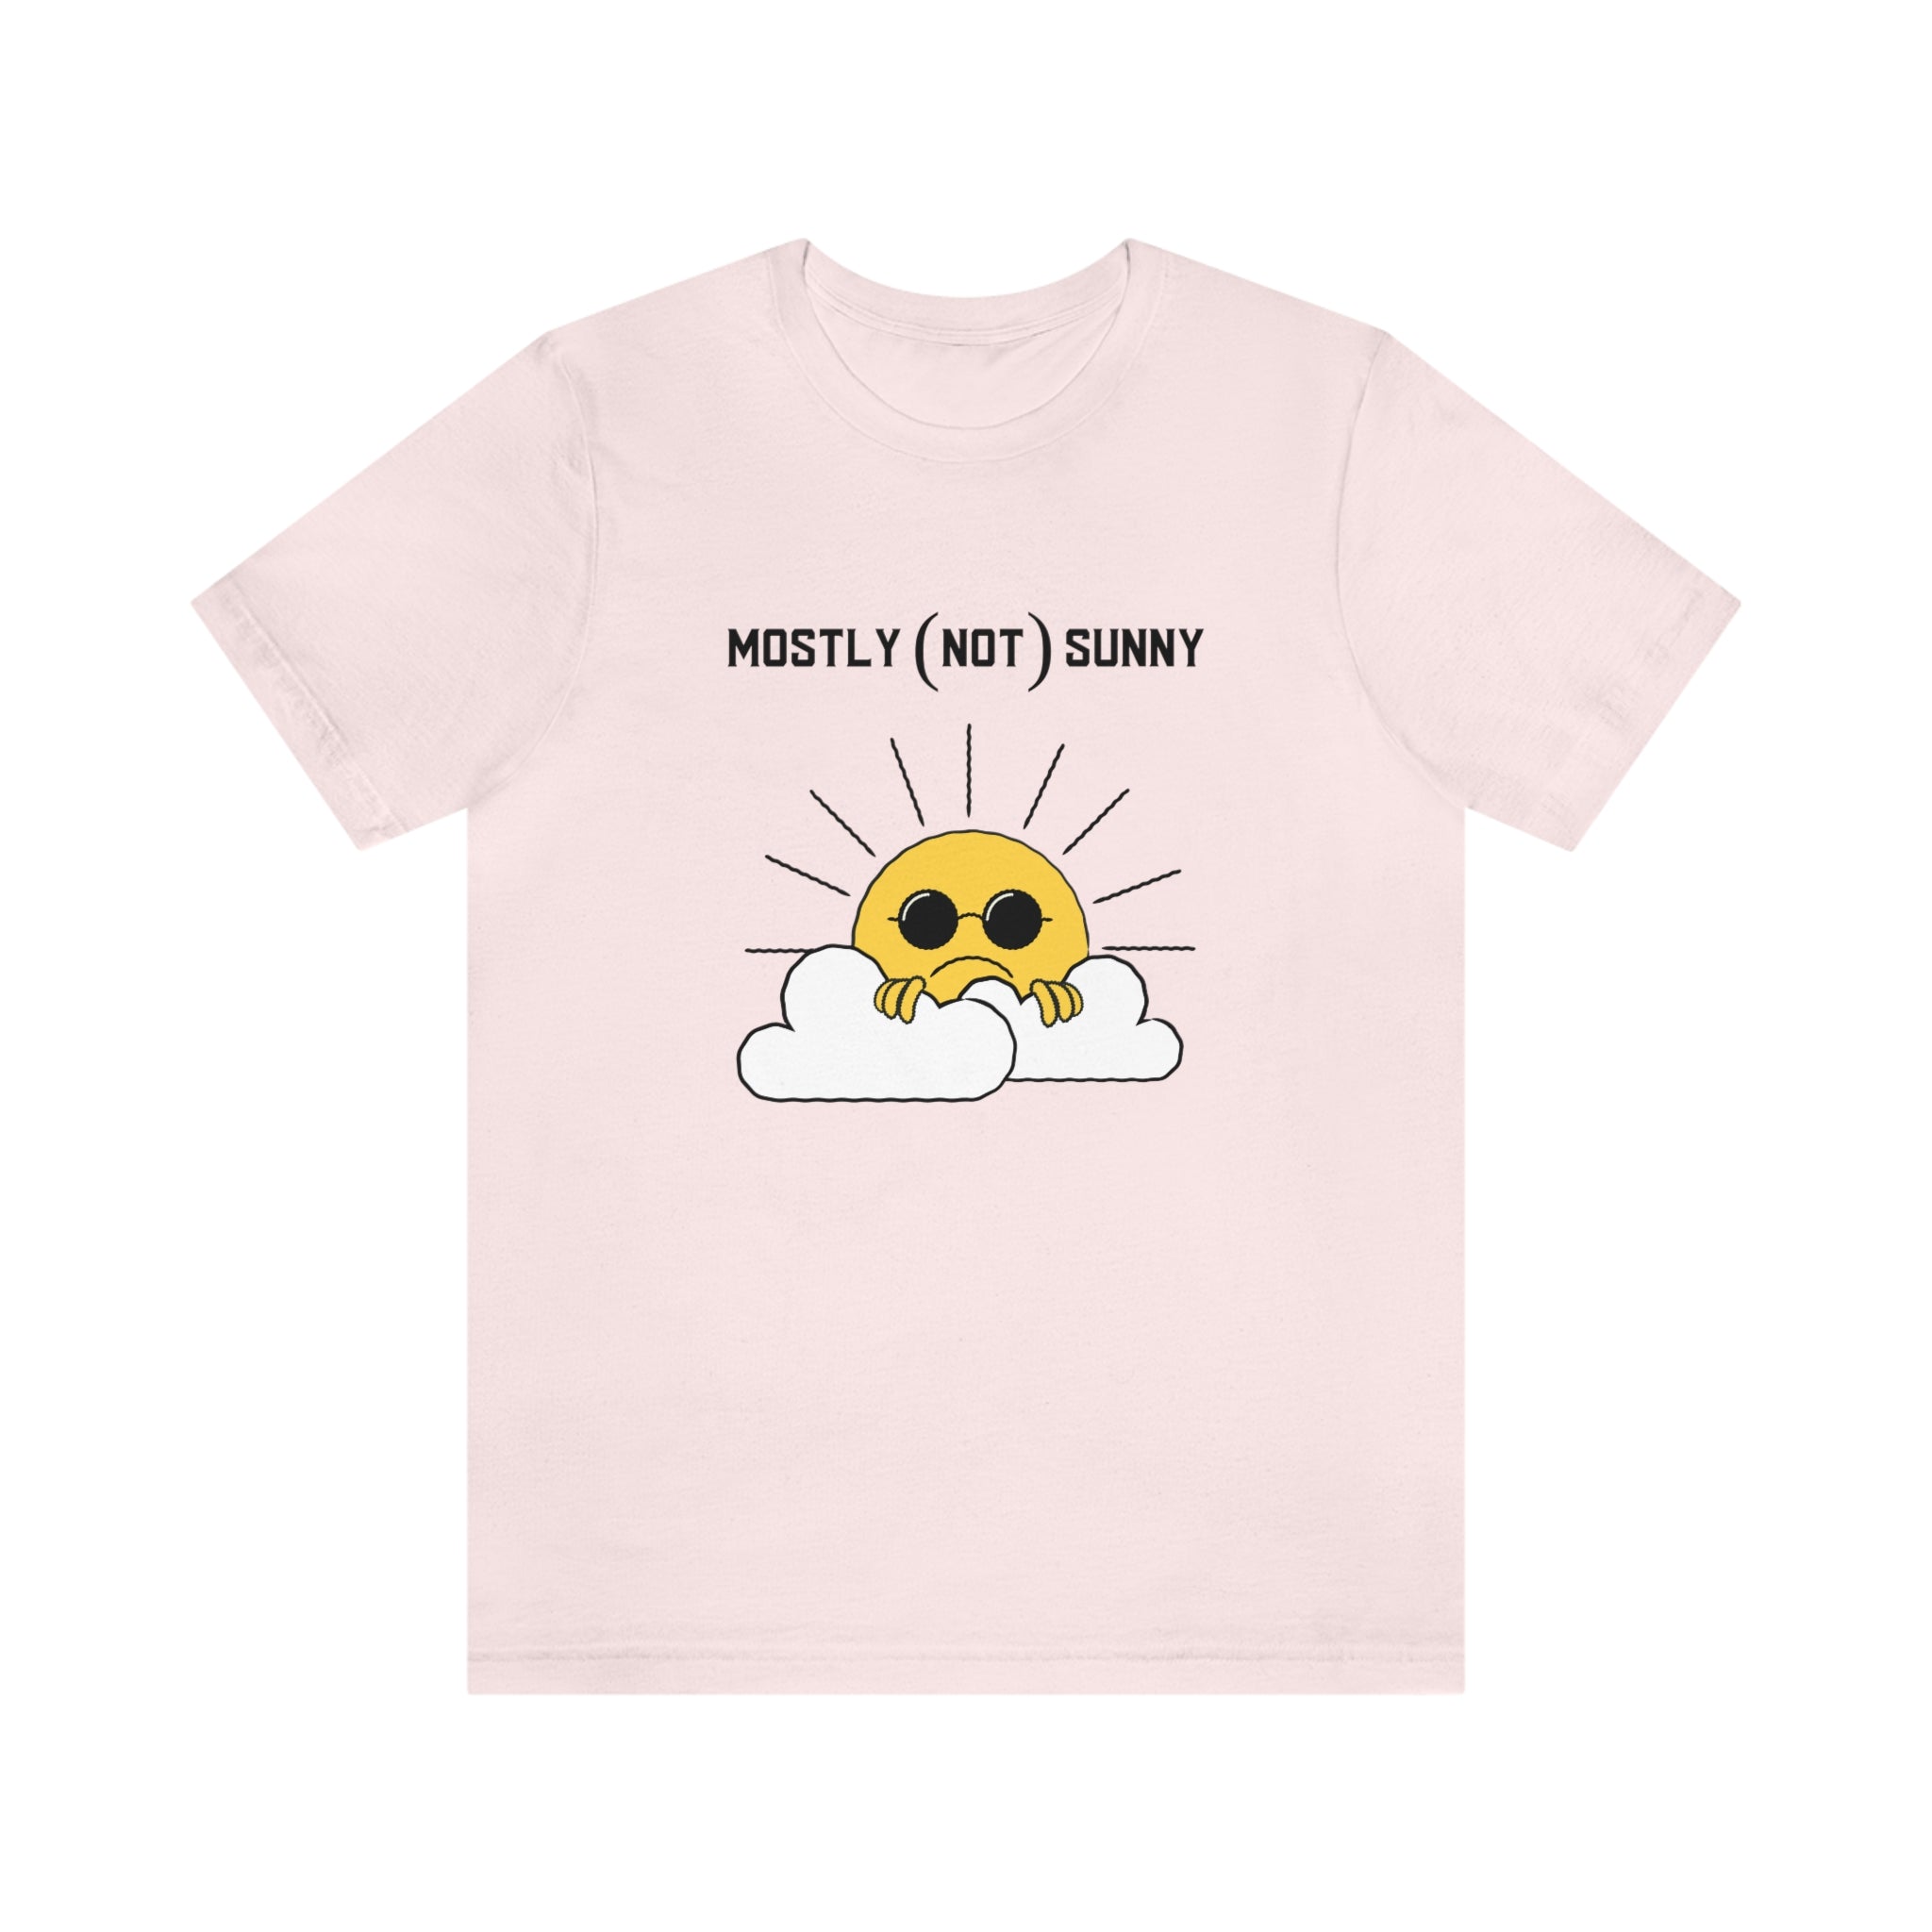 Mostly (Not) Sunny Tee 